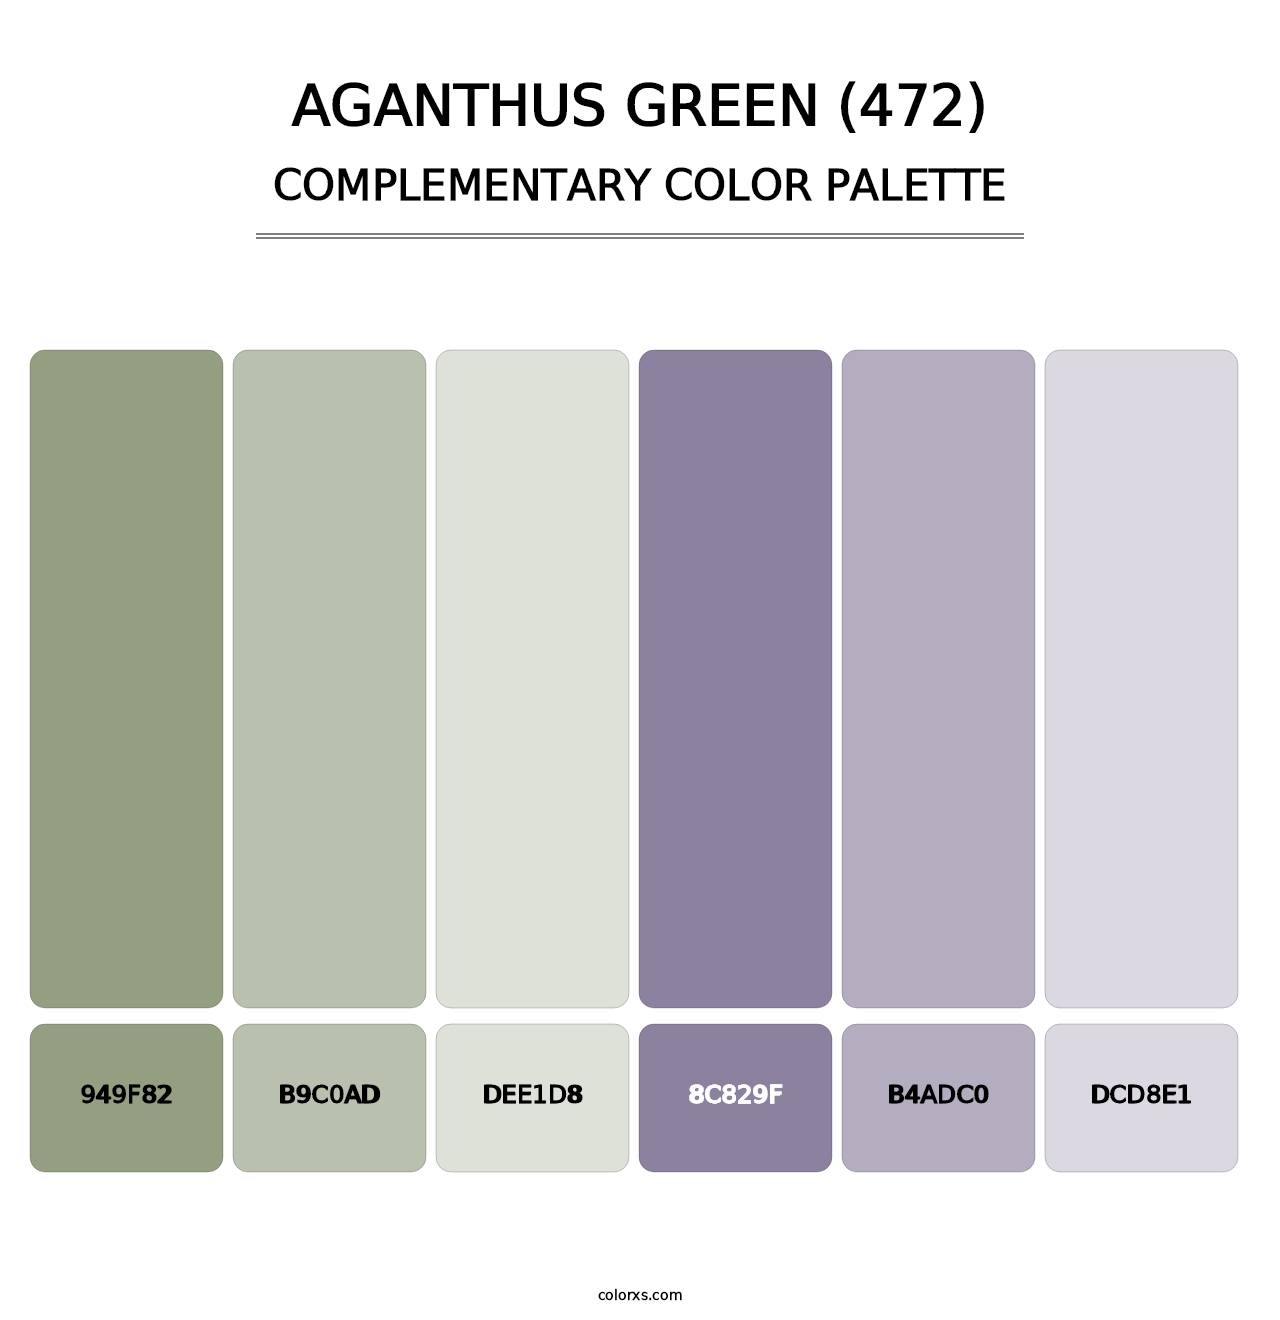 Aganthus Green (472) - Complementary Color Palette